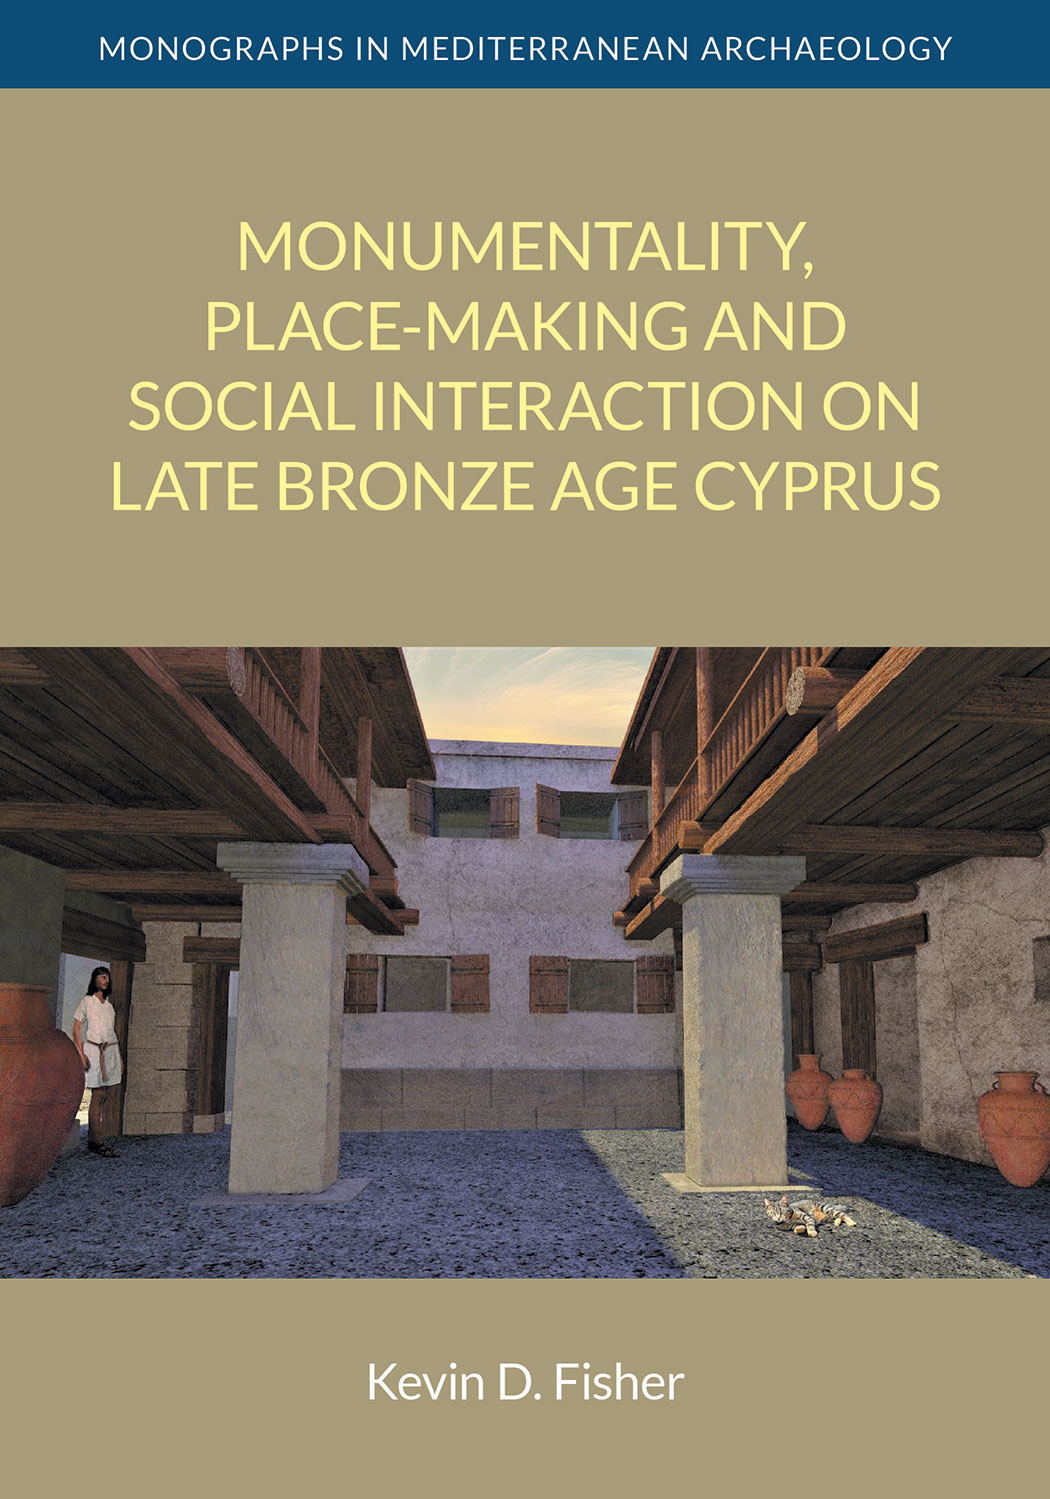 Monumentality, Place-making and Social Interaction on Late Bronze Age Cyprus